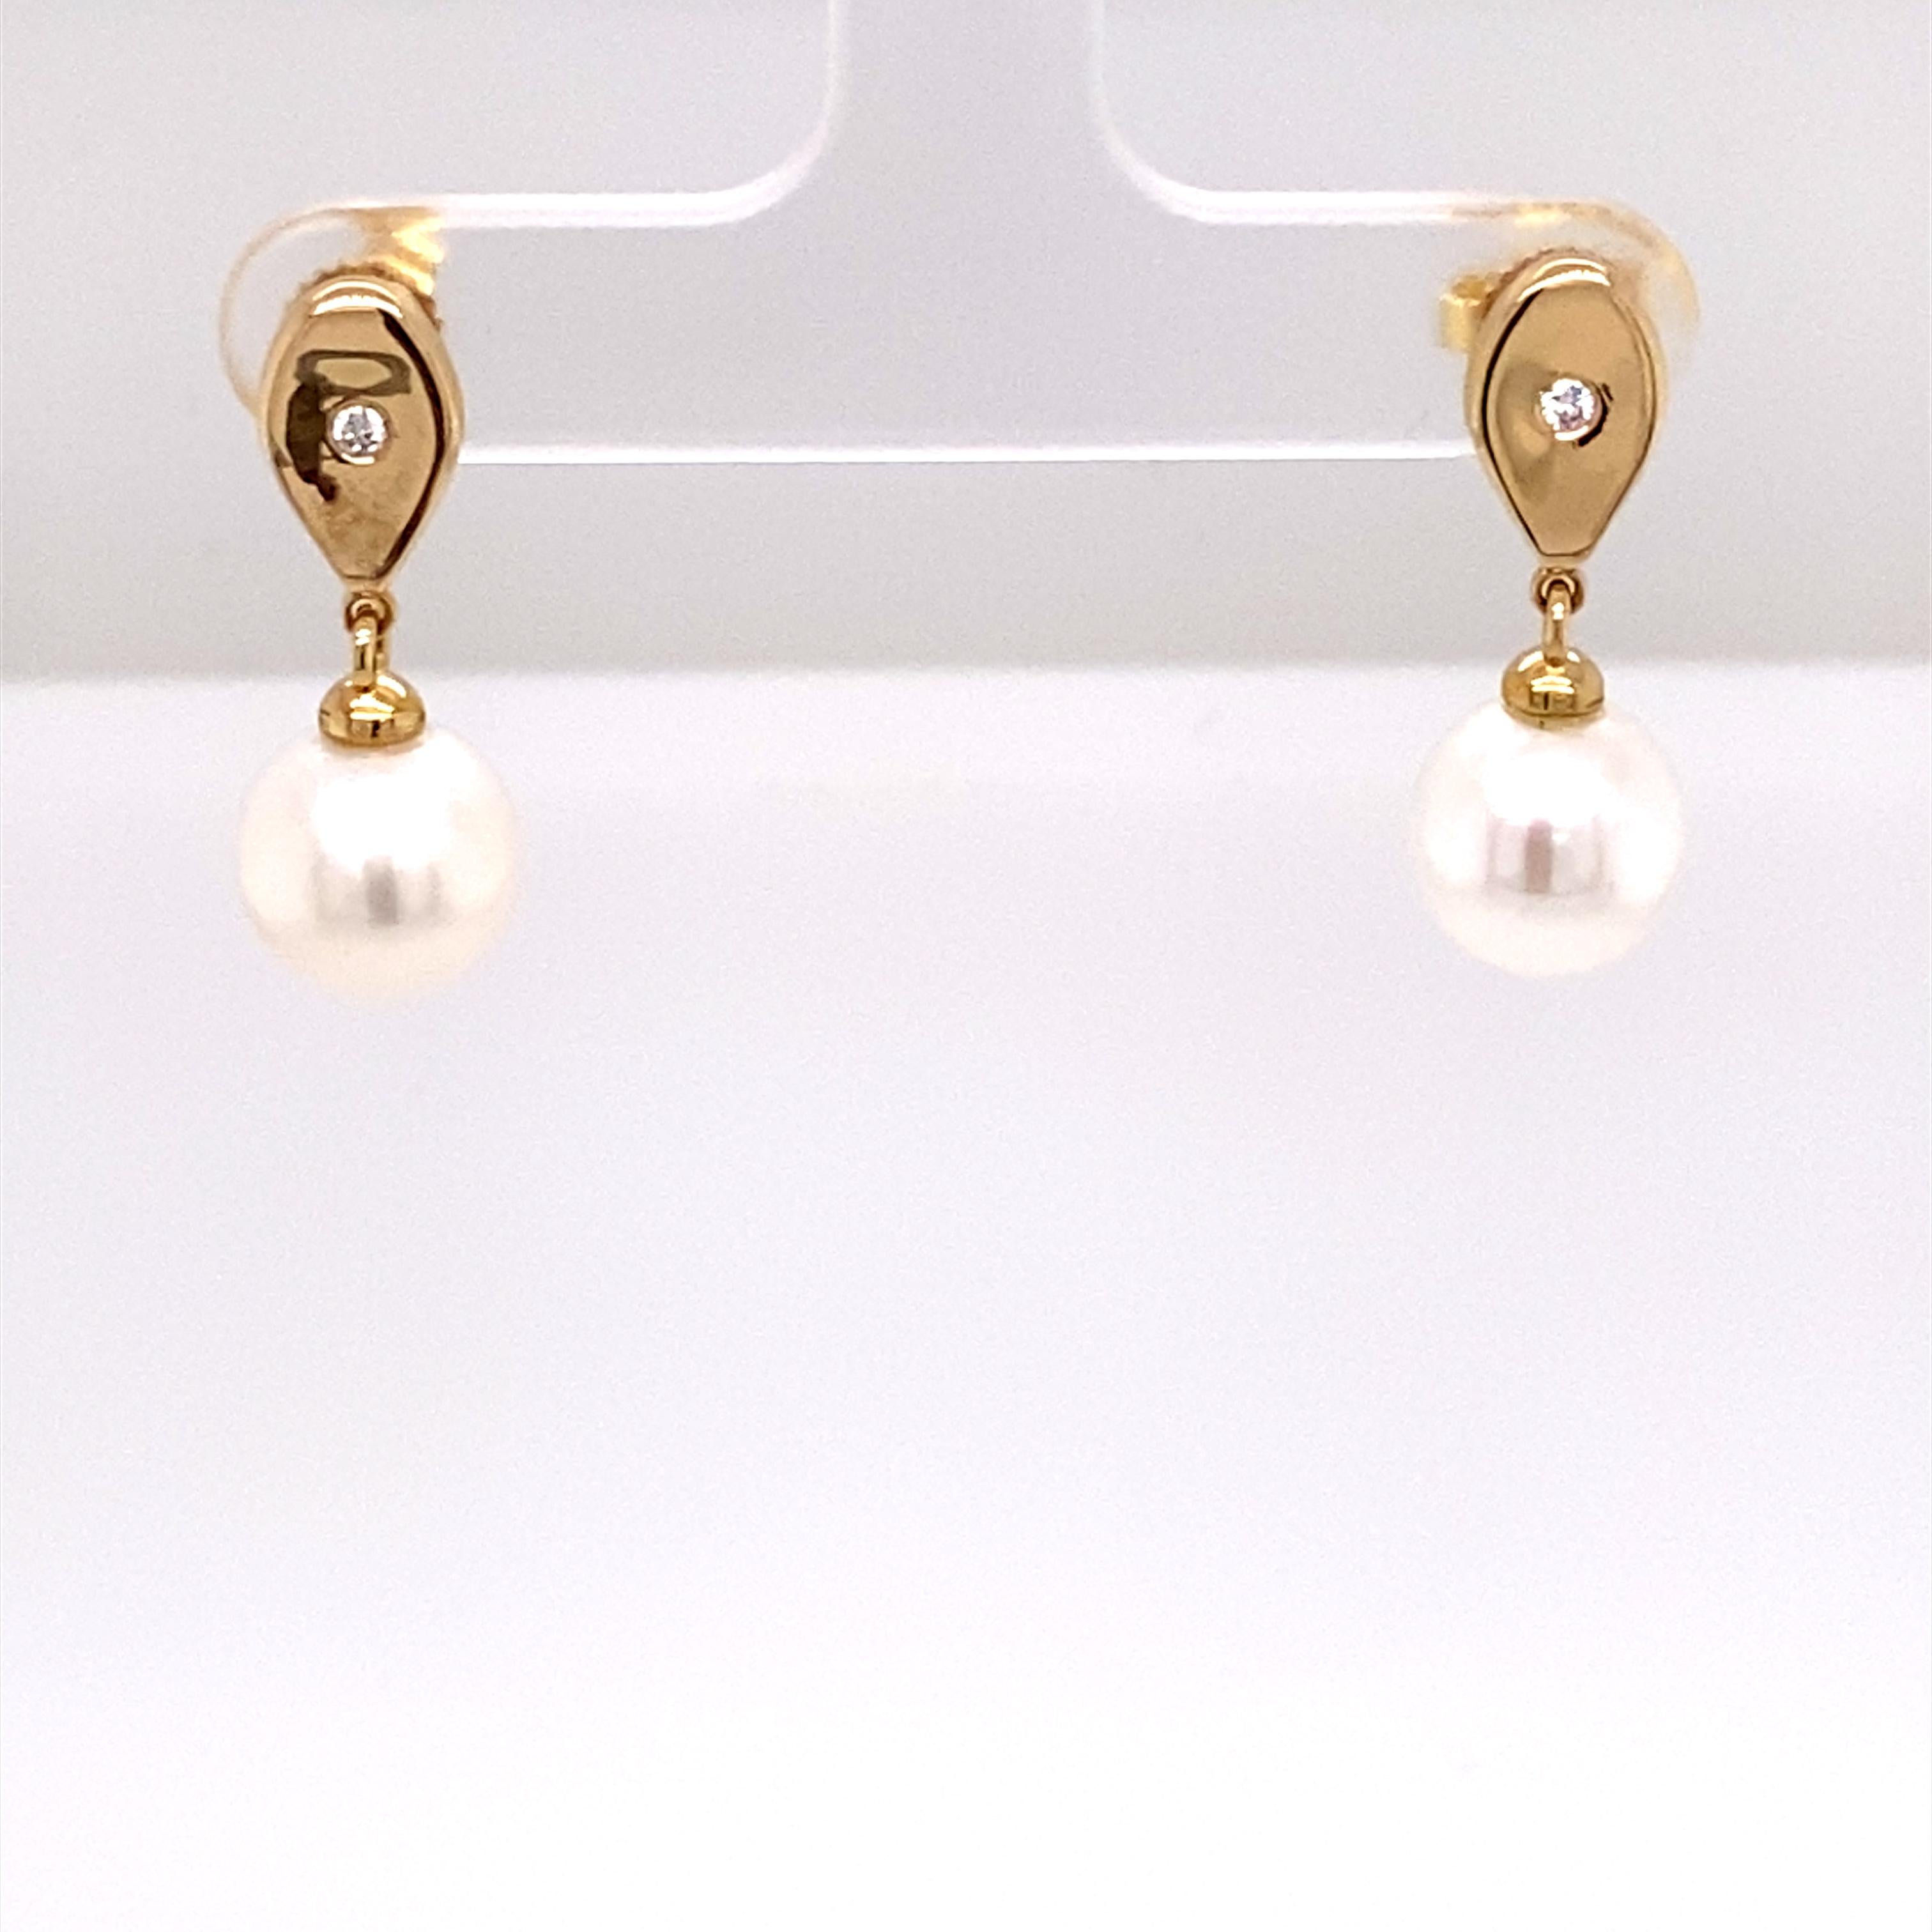 Designed for everyday wear these pearl earrings add a touch of effortless glamour to your day.
Polished 14K Yellow Teardrop with a little sparkling diamond with a lustrous 8mm round white freshwater pearl drop.
A timeless style that is light and